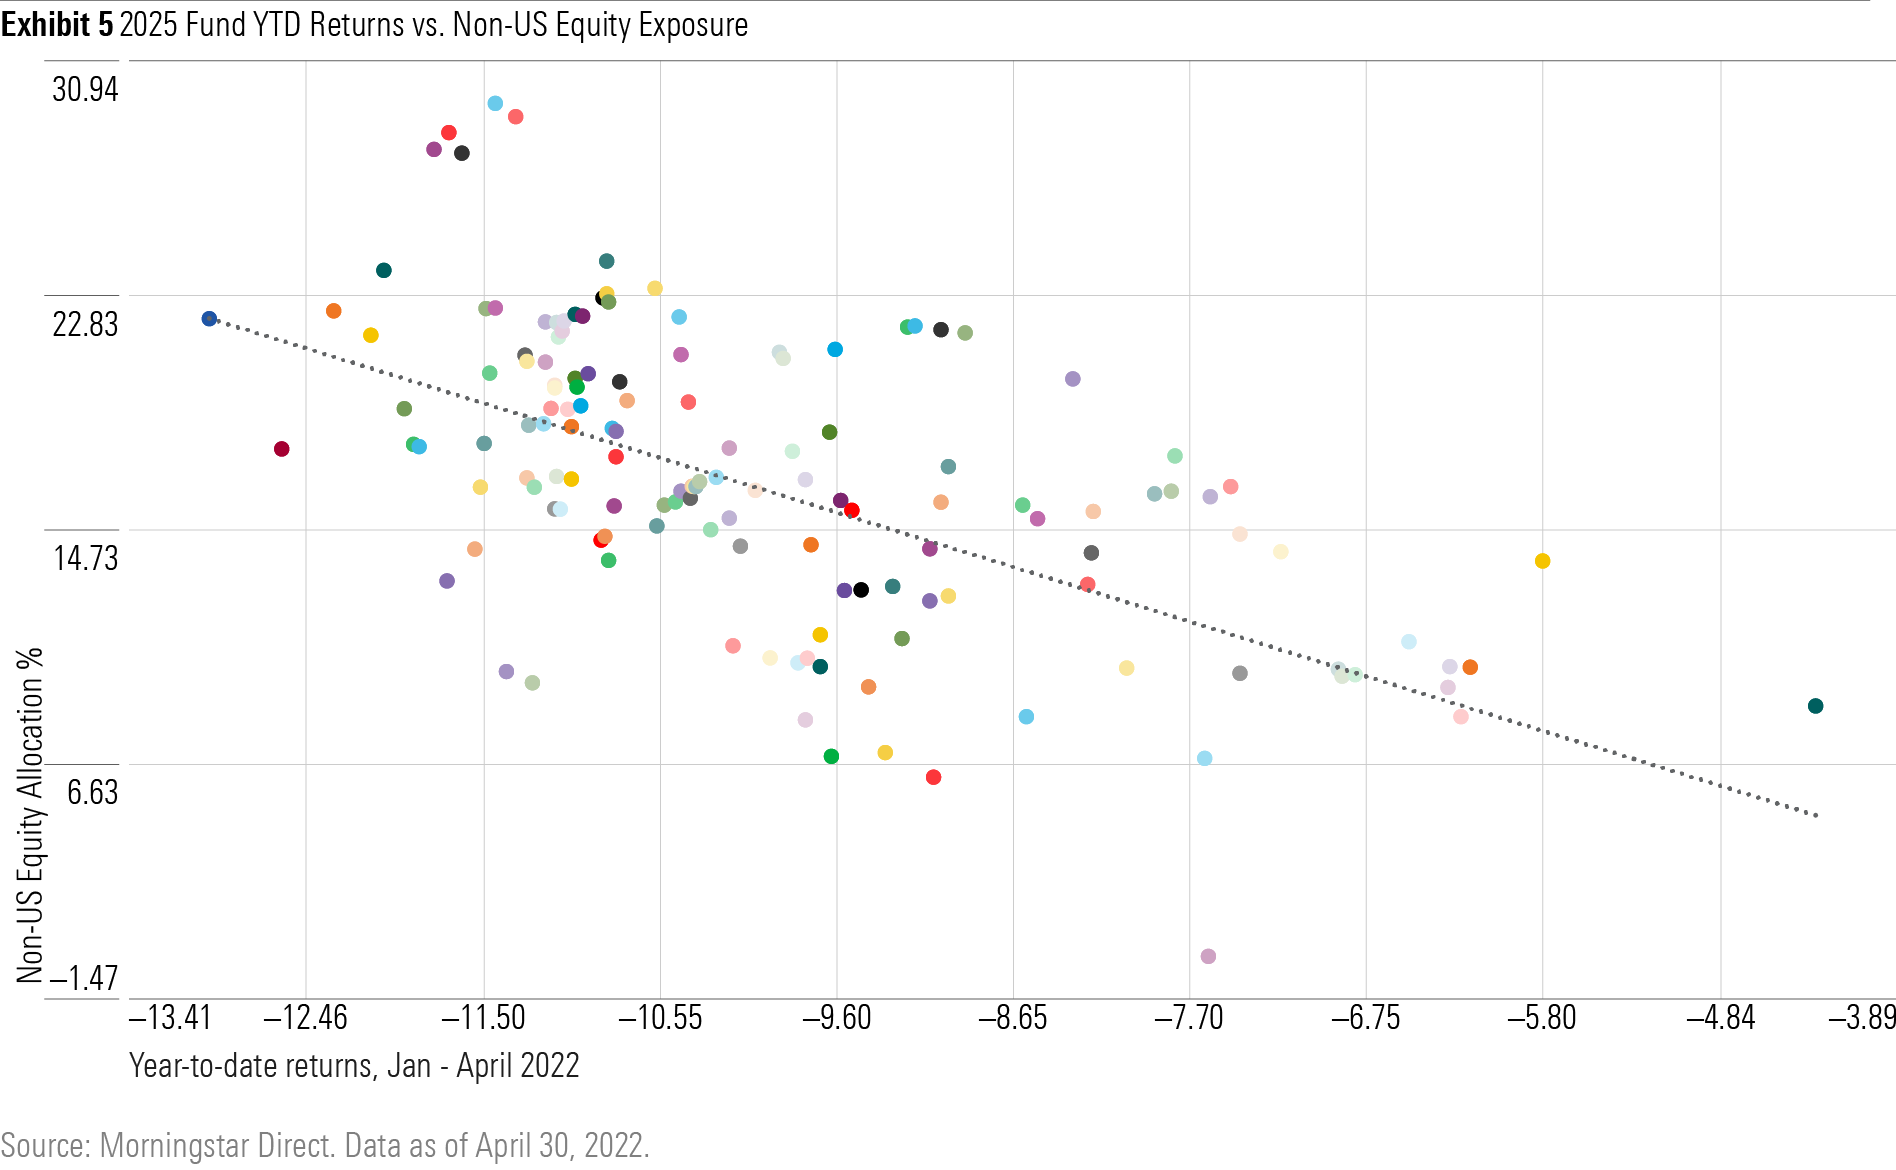 A scatterplot graph showing that higher non-US equity exposure has been correlated with greater year-to-date losses.